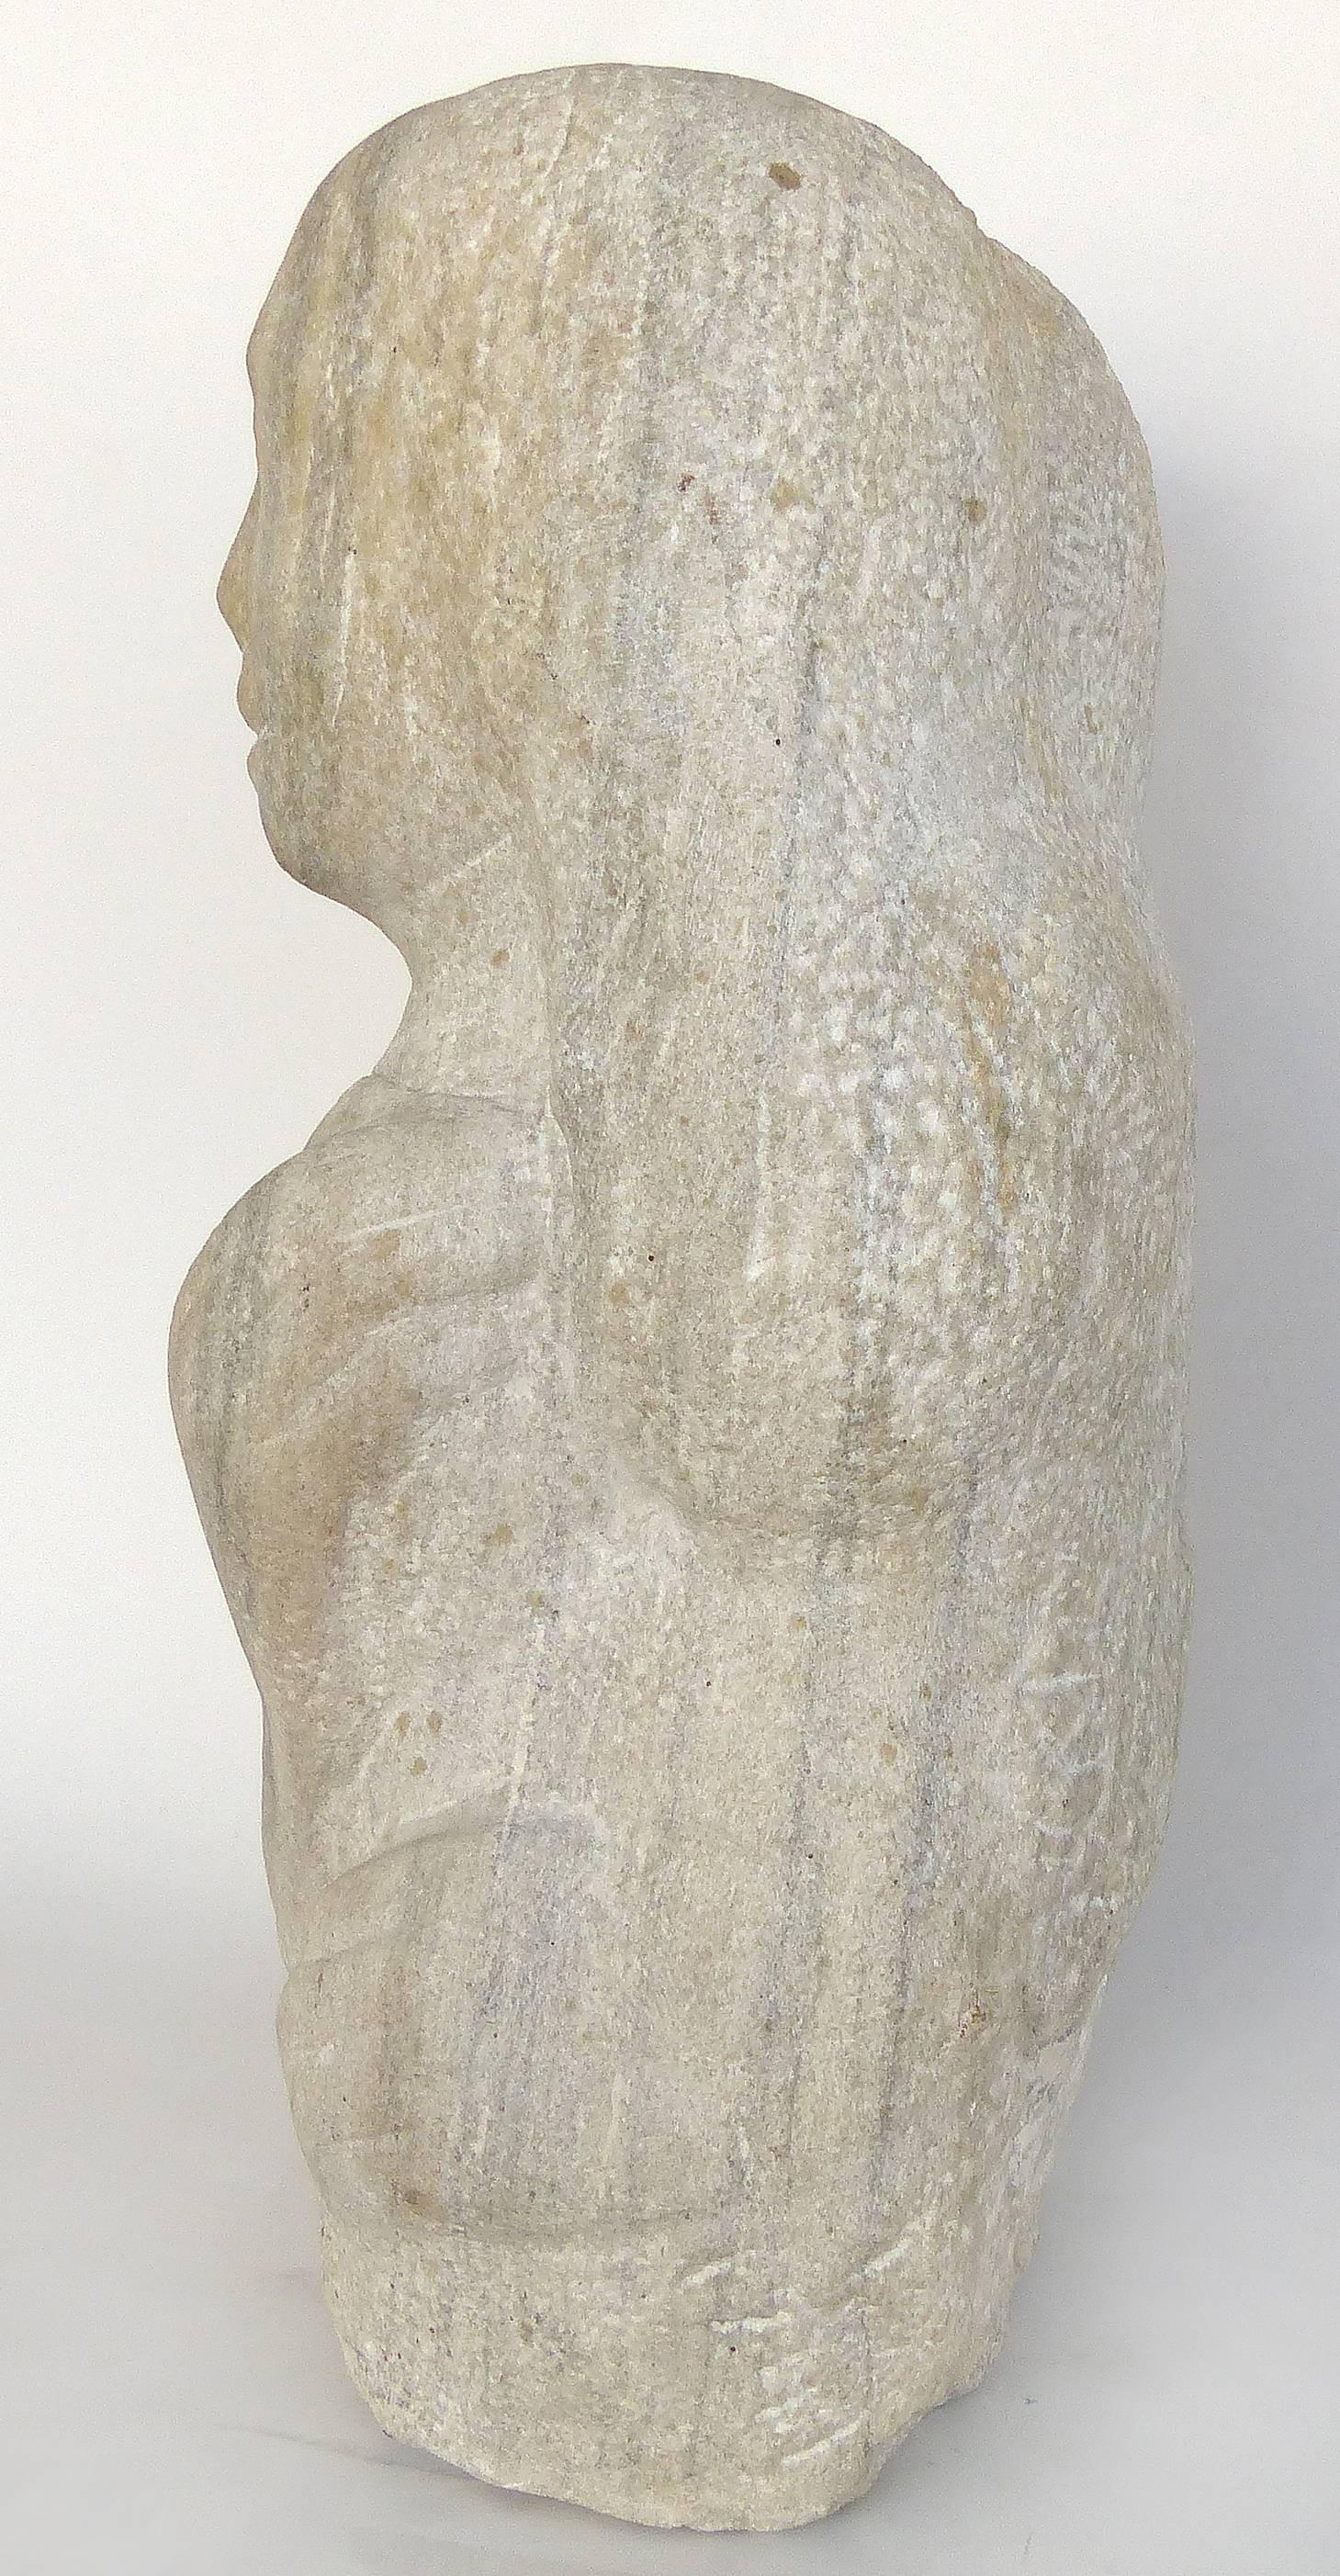 American Midcentury Figurative Carved Limestone Sculpture by Florence Krieger, 1919-2011